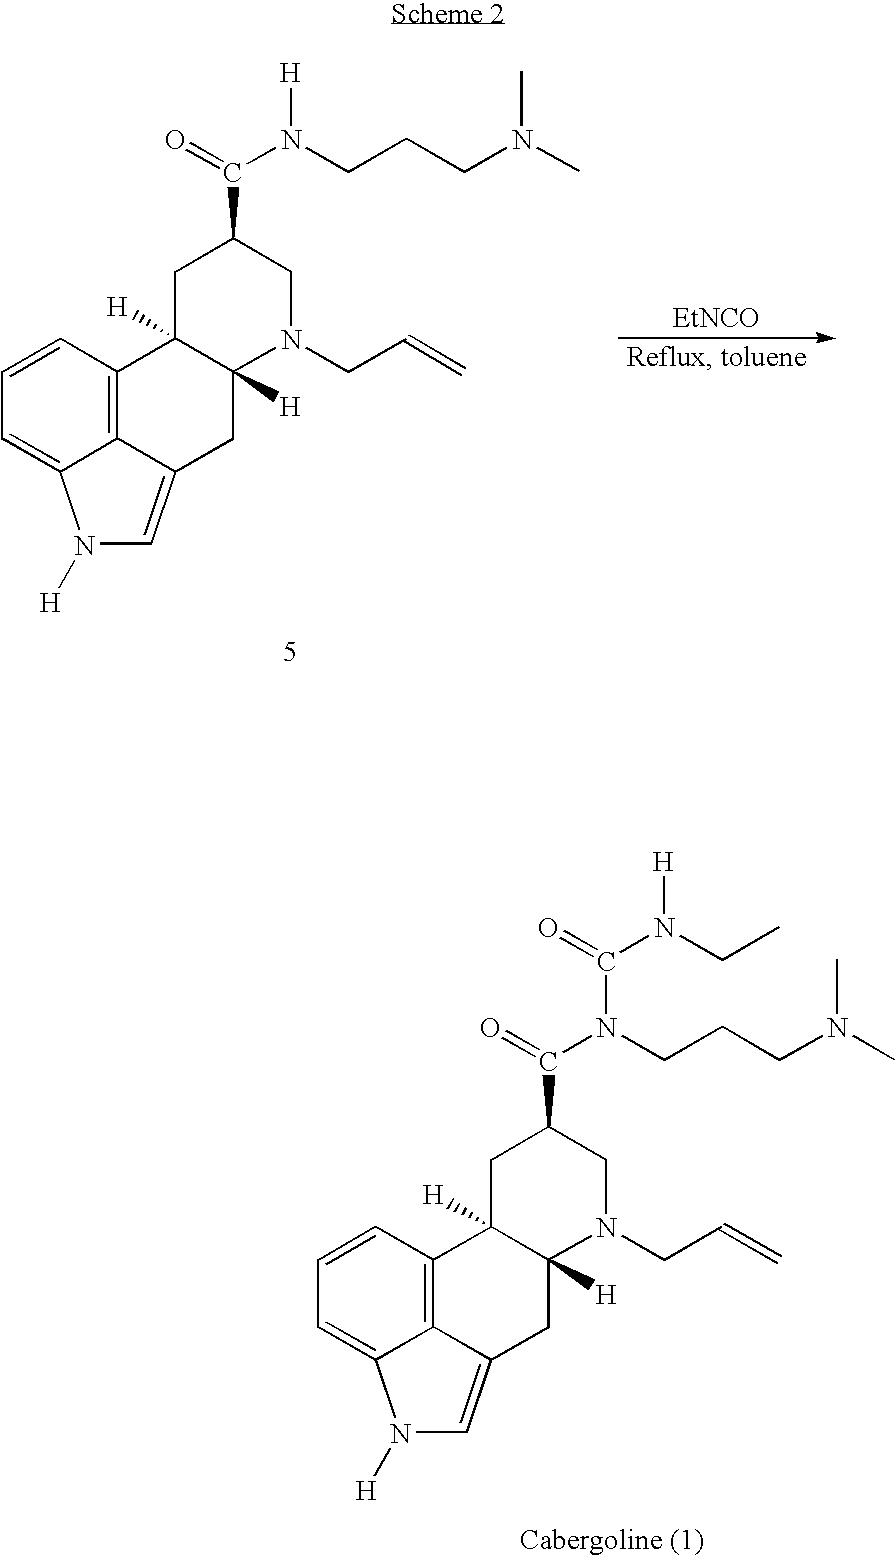 New and efficient process for the preperation of cabergoline and its intermediates